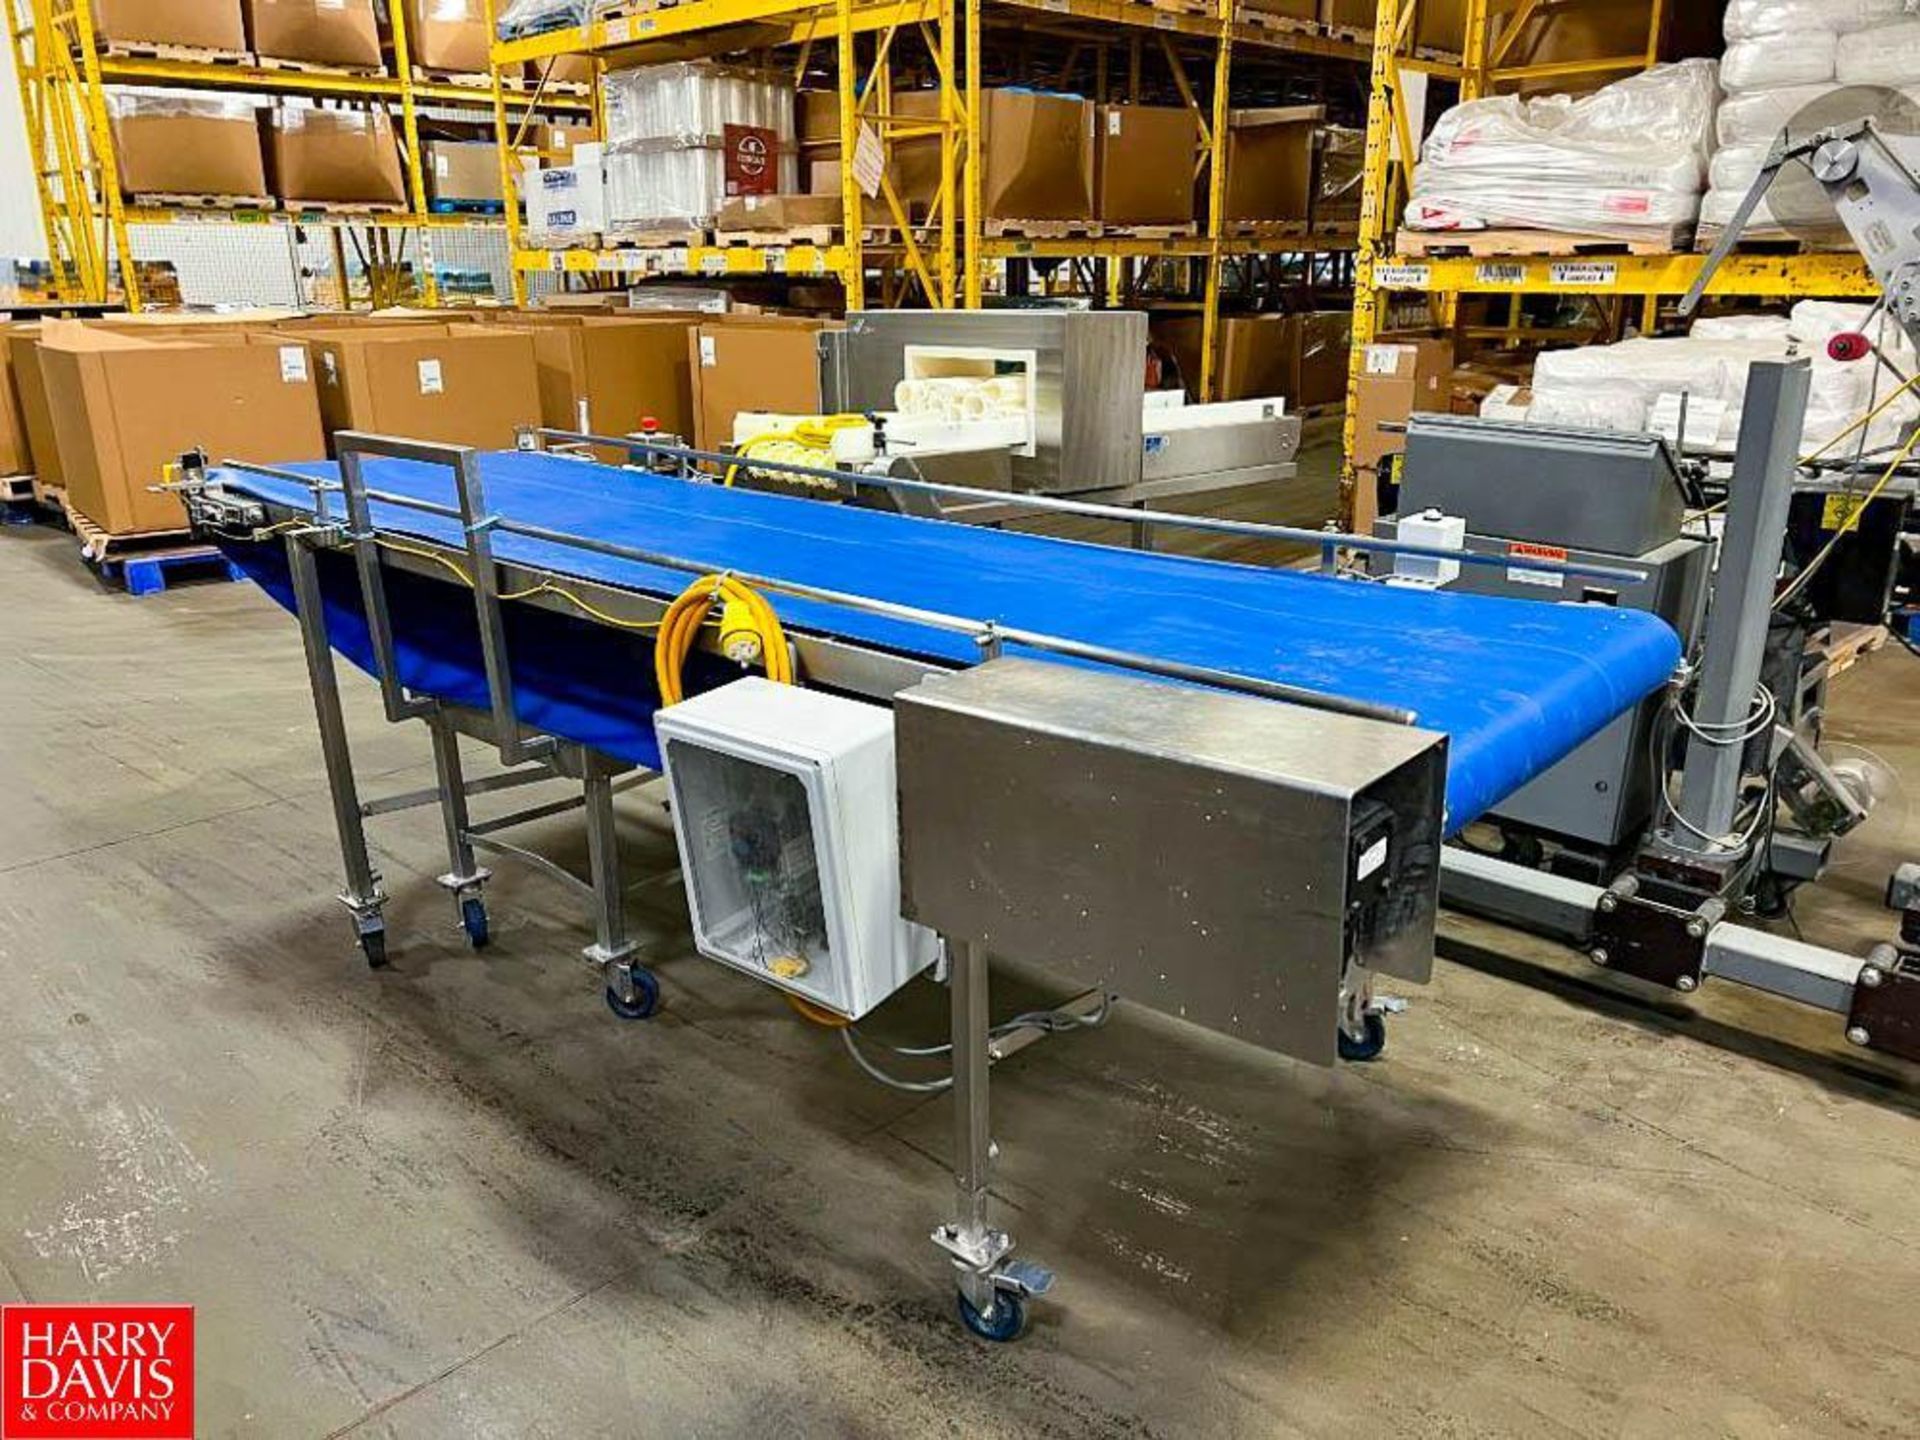 Mobile S/S Framed Belt Conveyor with Allen-Bradley Powerflex and Drive, Dimensions = 118" x 32" - Image 2 of 2